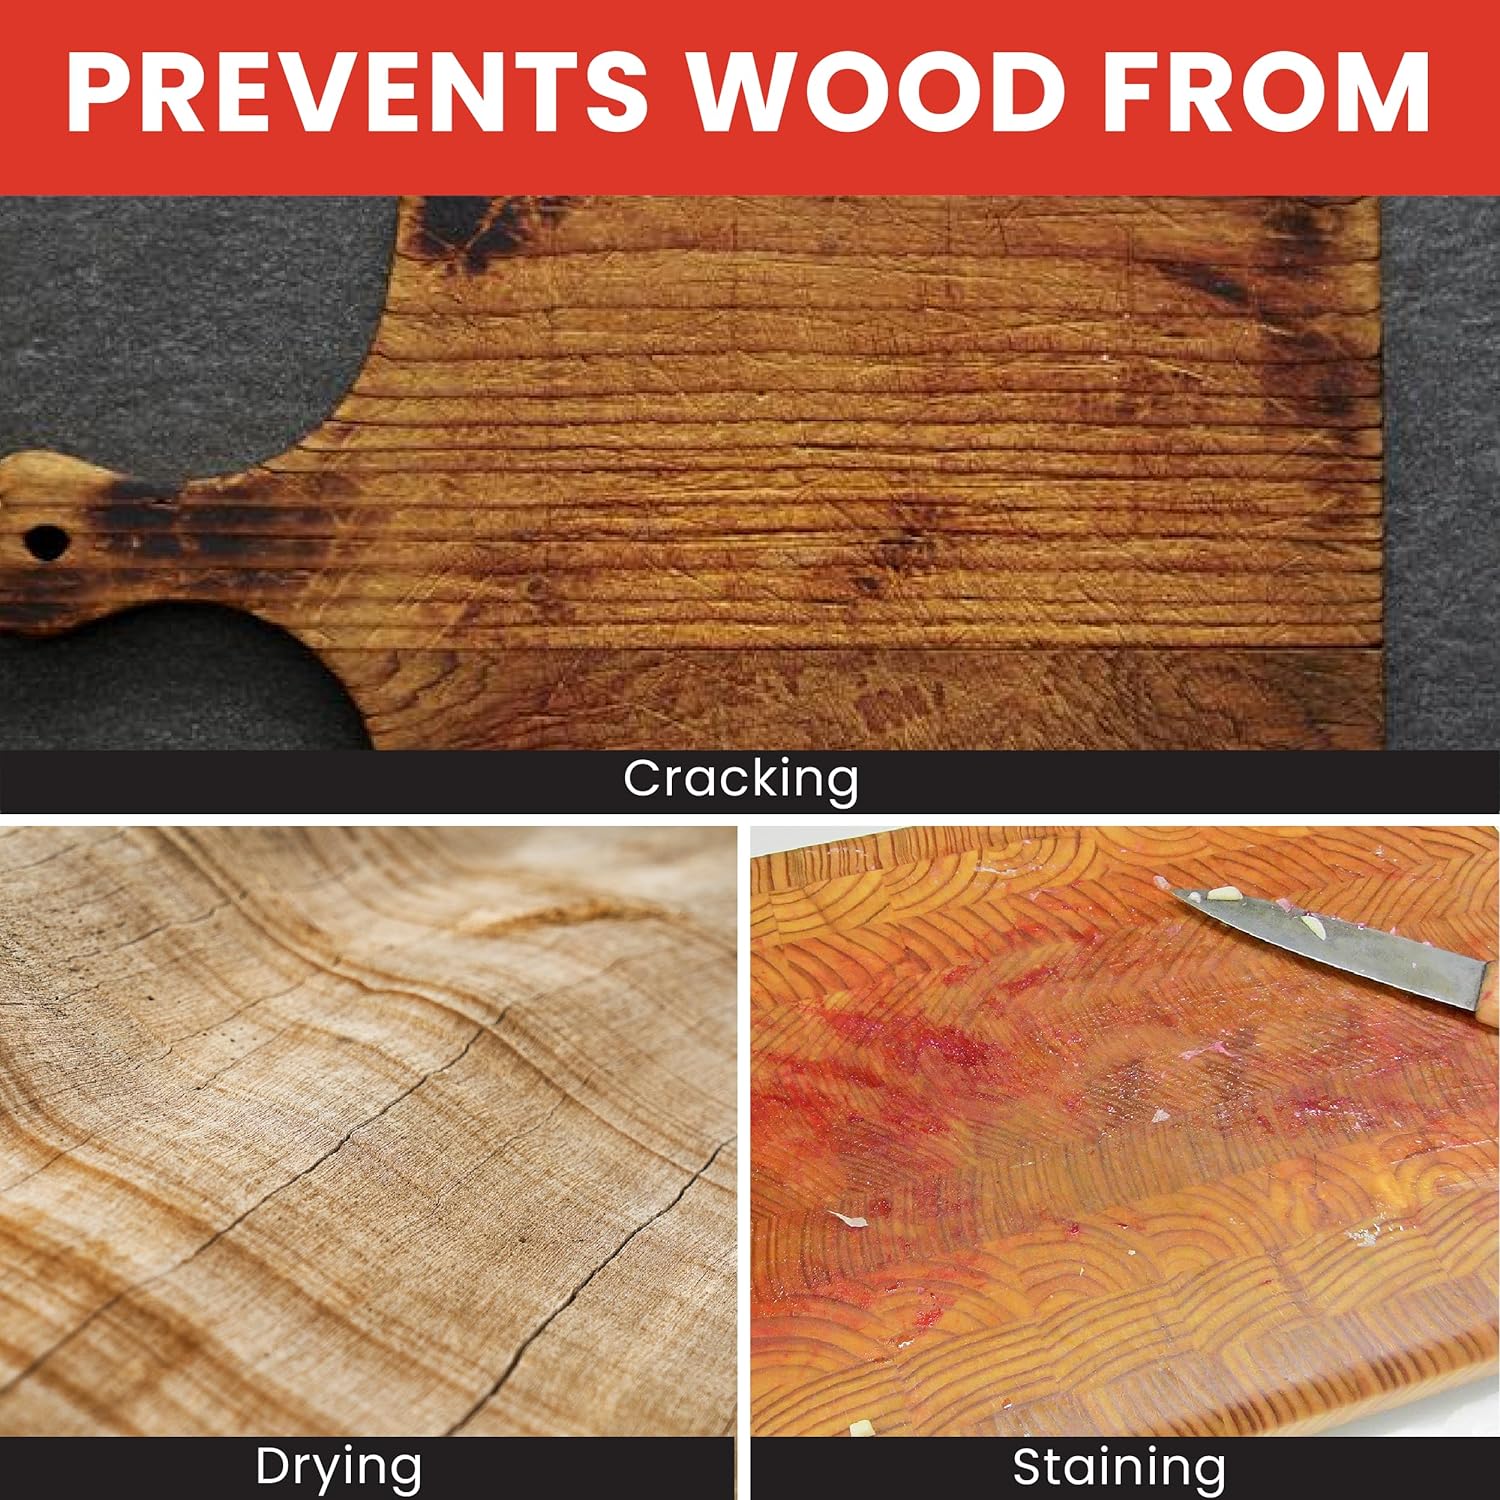 Cutting Board Cream - Wood Wax - Wood Conditioner - Food Grade Wax for Wooden Utensils, Tools, Countertops - Cutting Board Wax - Cracking and Warping Protection - 120ml/4 oz - Beaver Wood Care : Health & Household